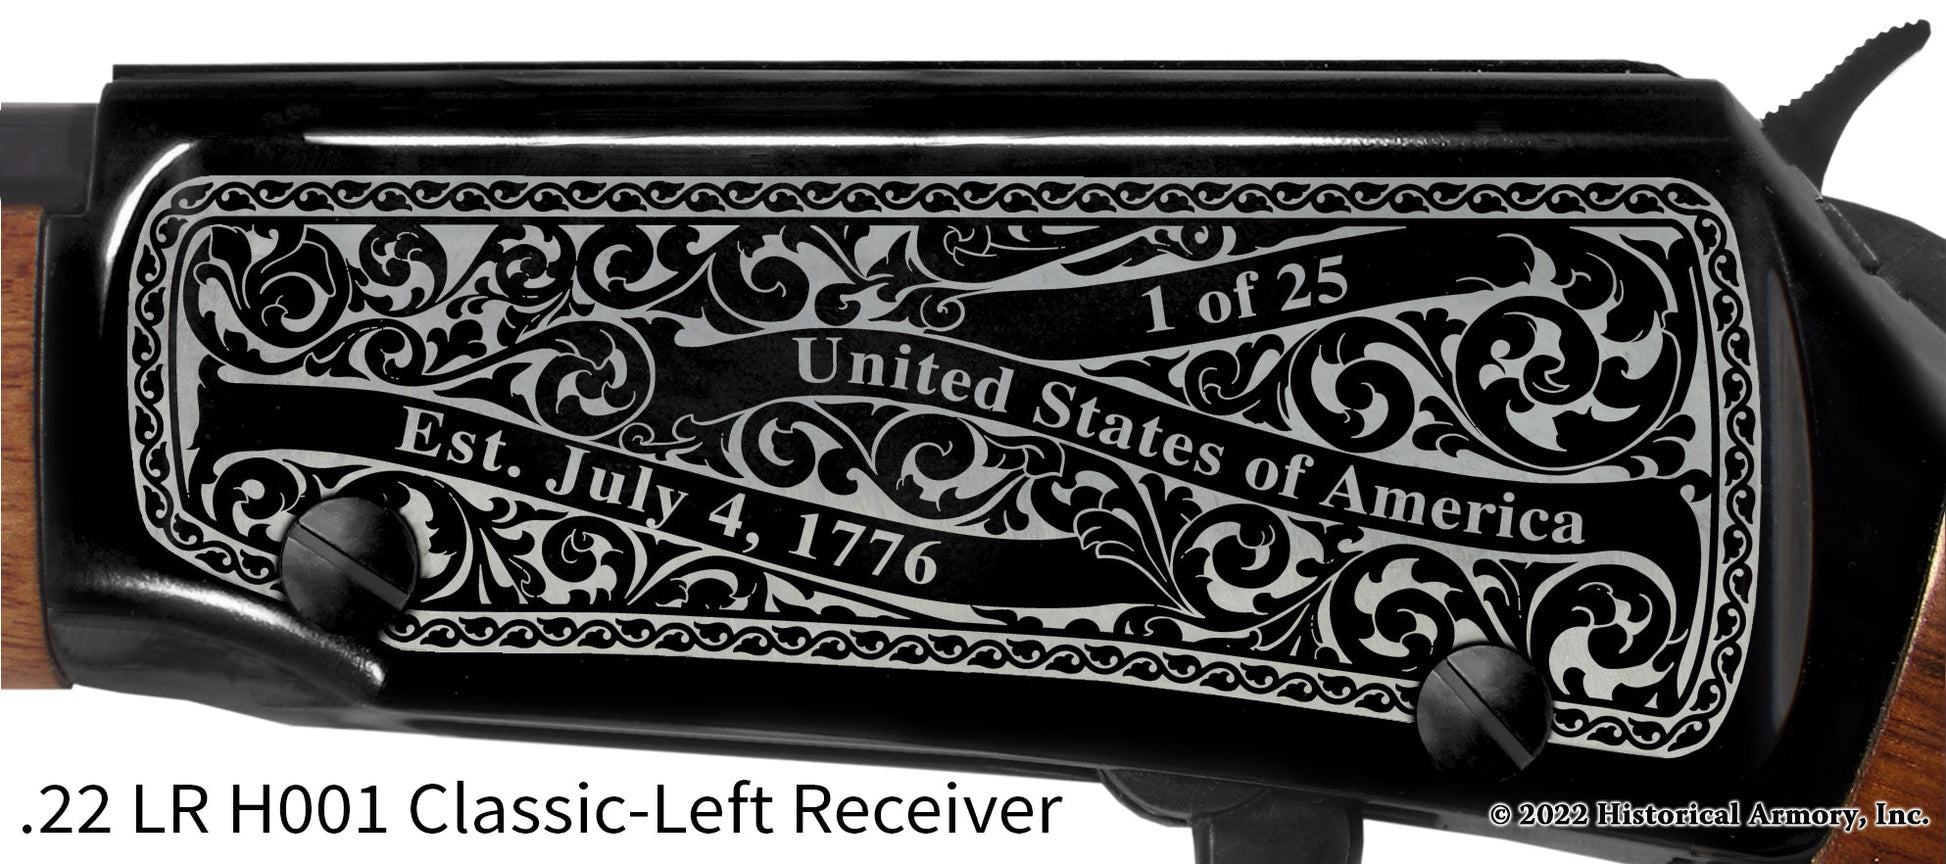 Pike County Ohio Engraved Henry H001 Rifle